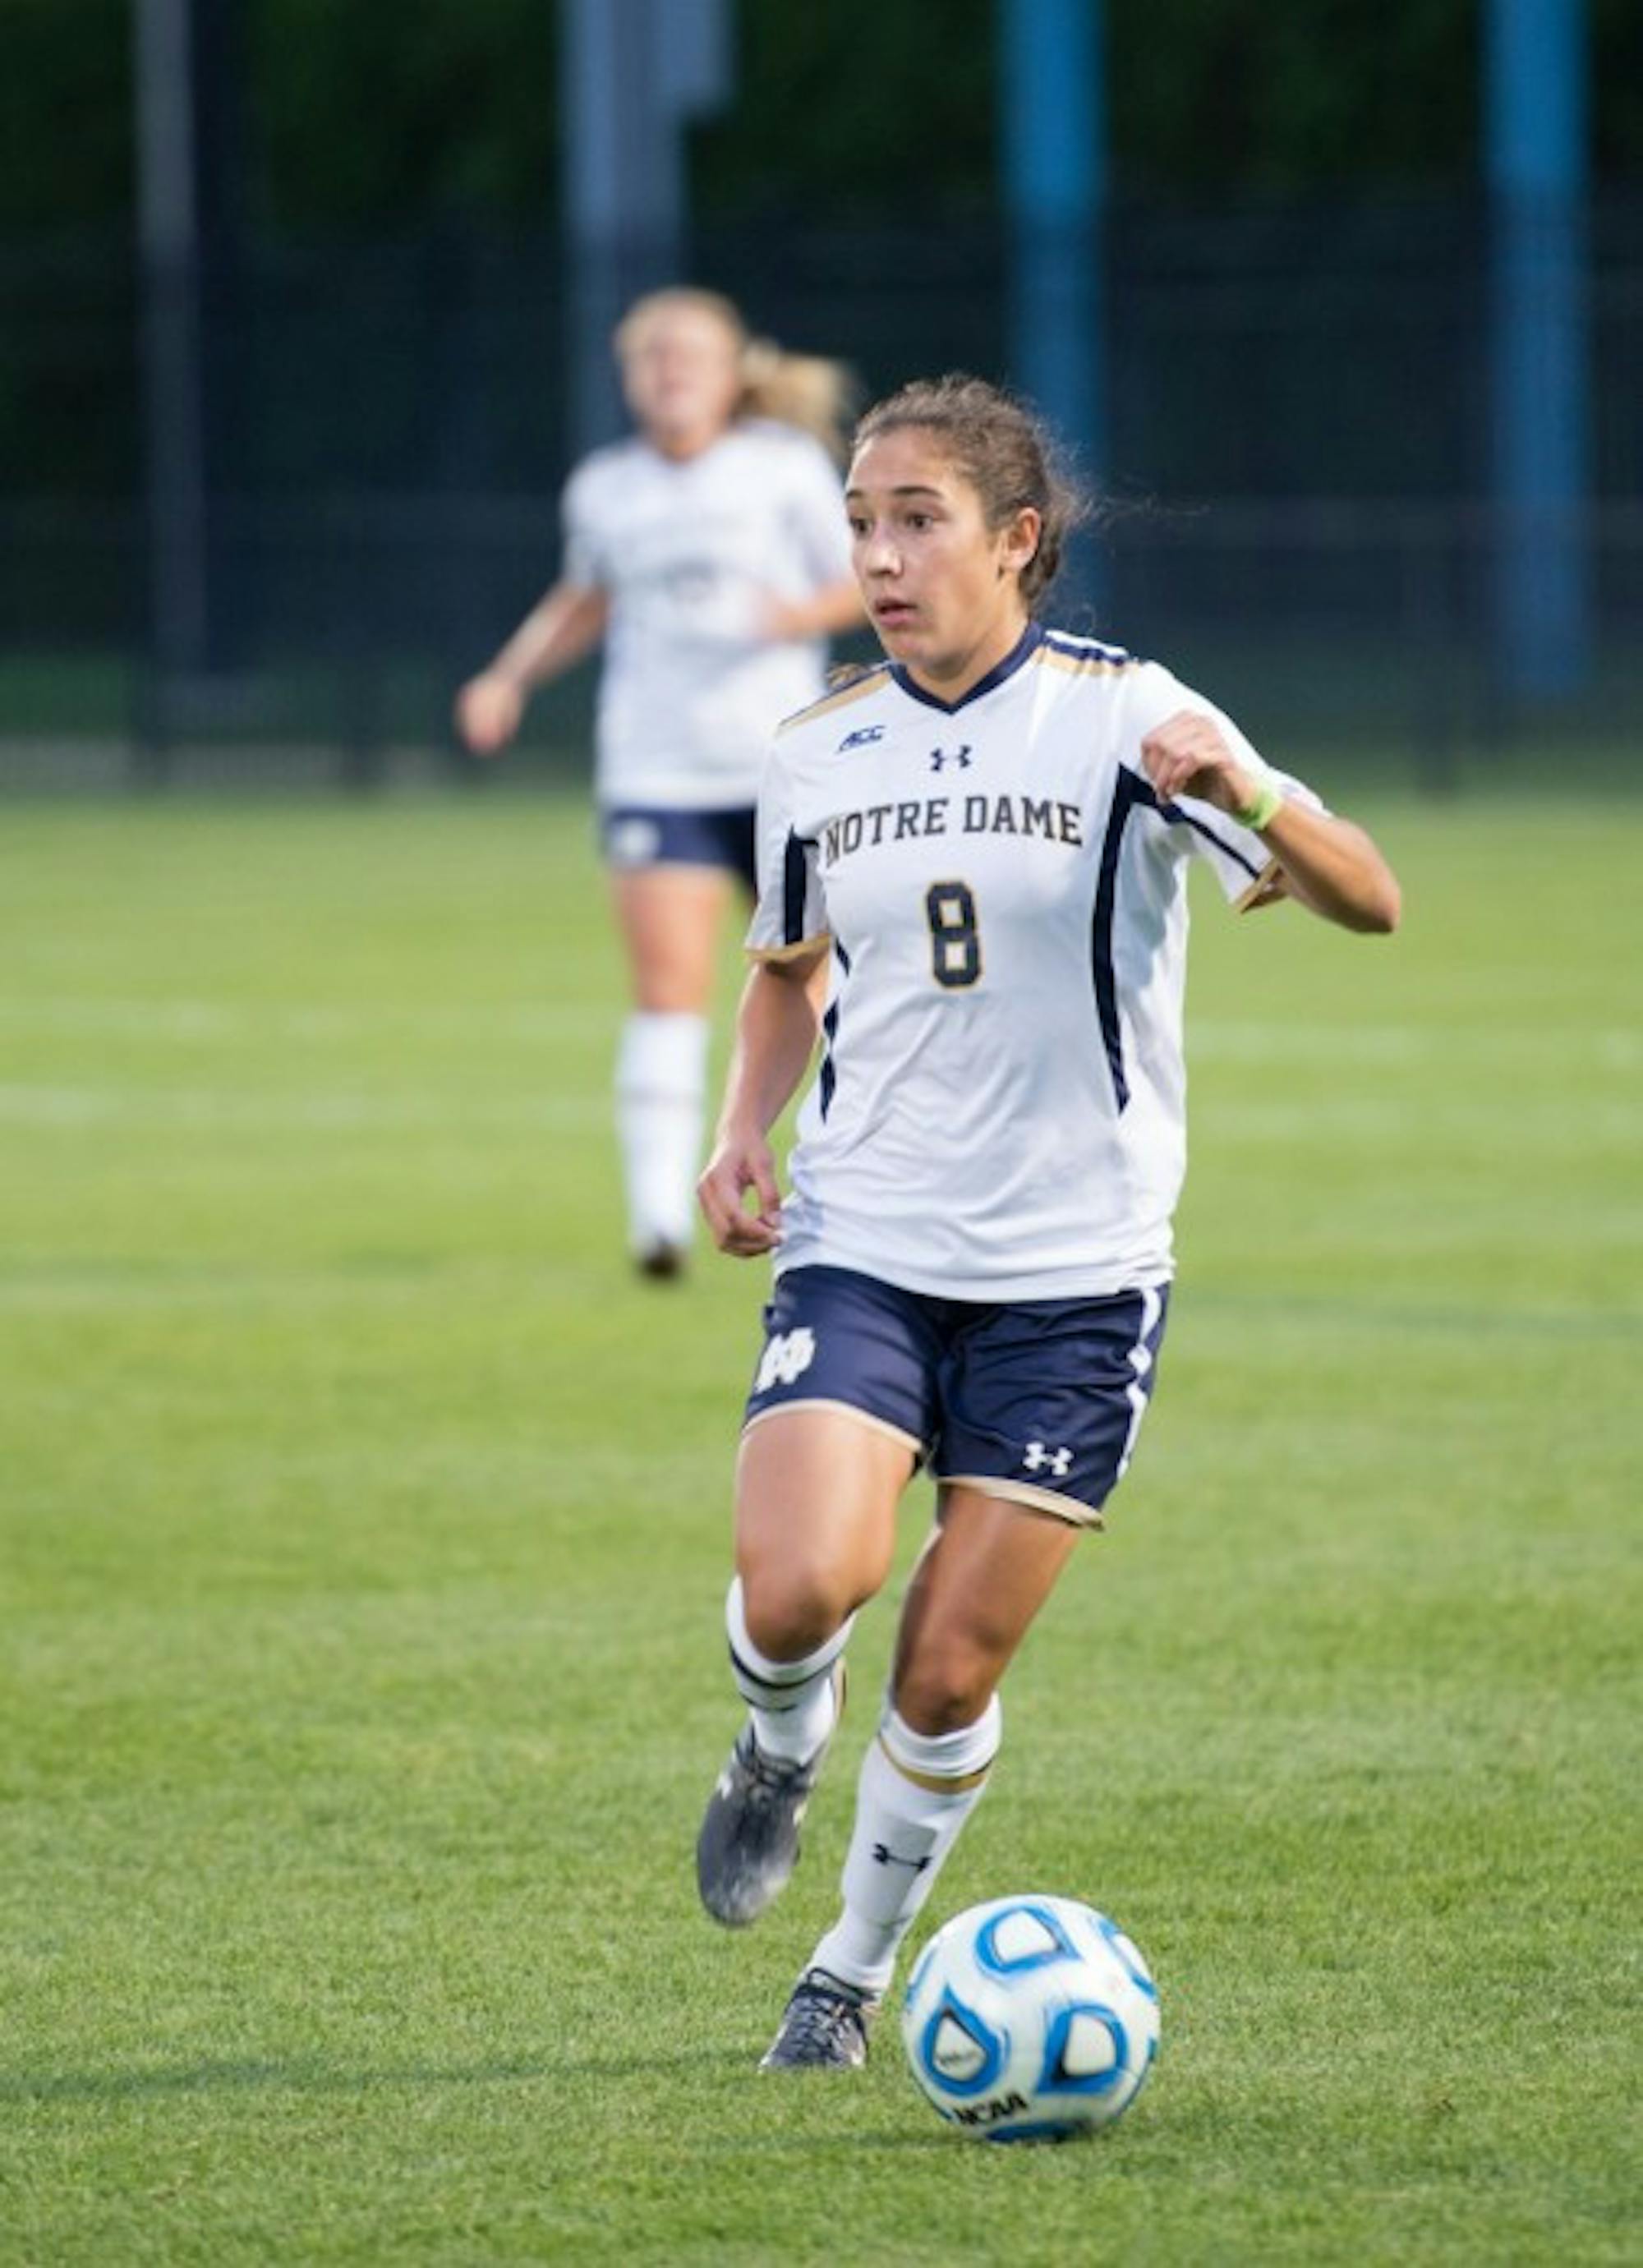 Notre Dame freshman midfielder Sabrina Flores brings the ball downfield during a 1-0 win over Baylor at Alumni Stadium on Sept. 12. The Irish finished the season with a 14-6-2 overall record.